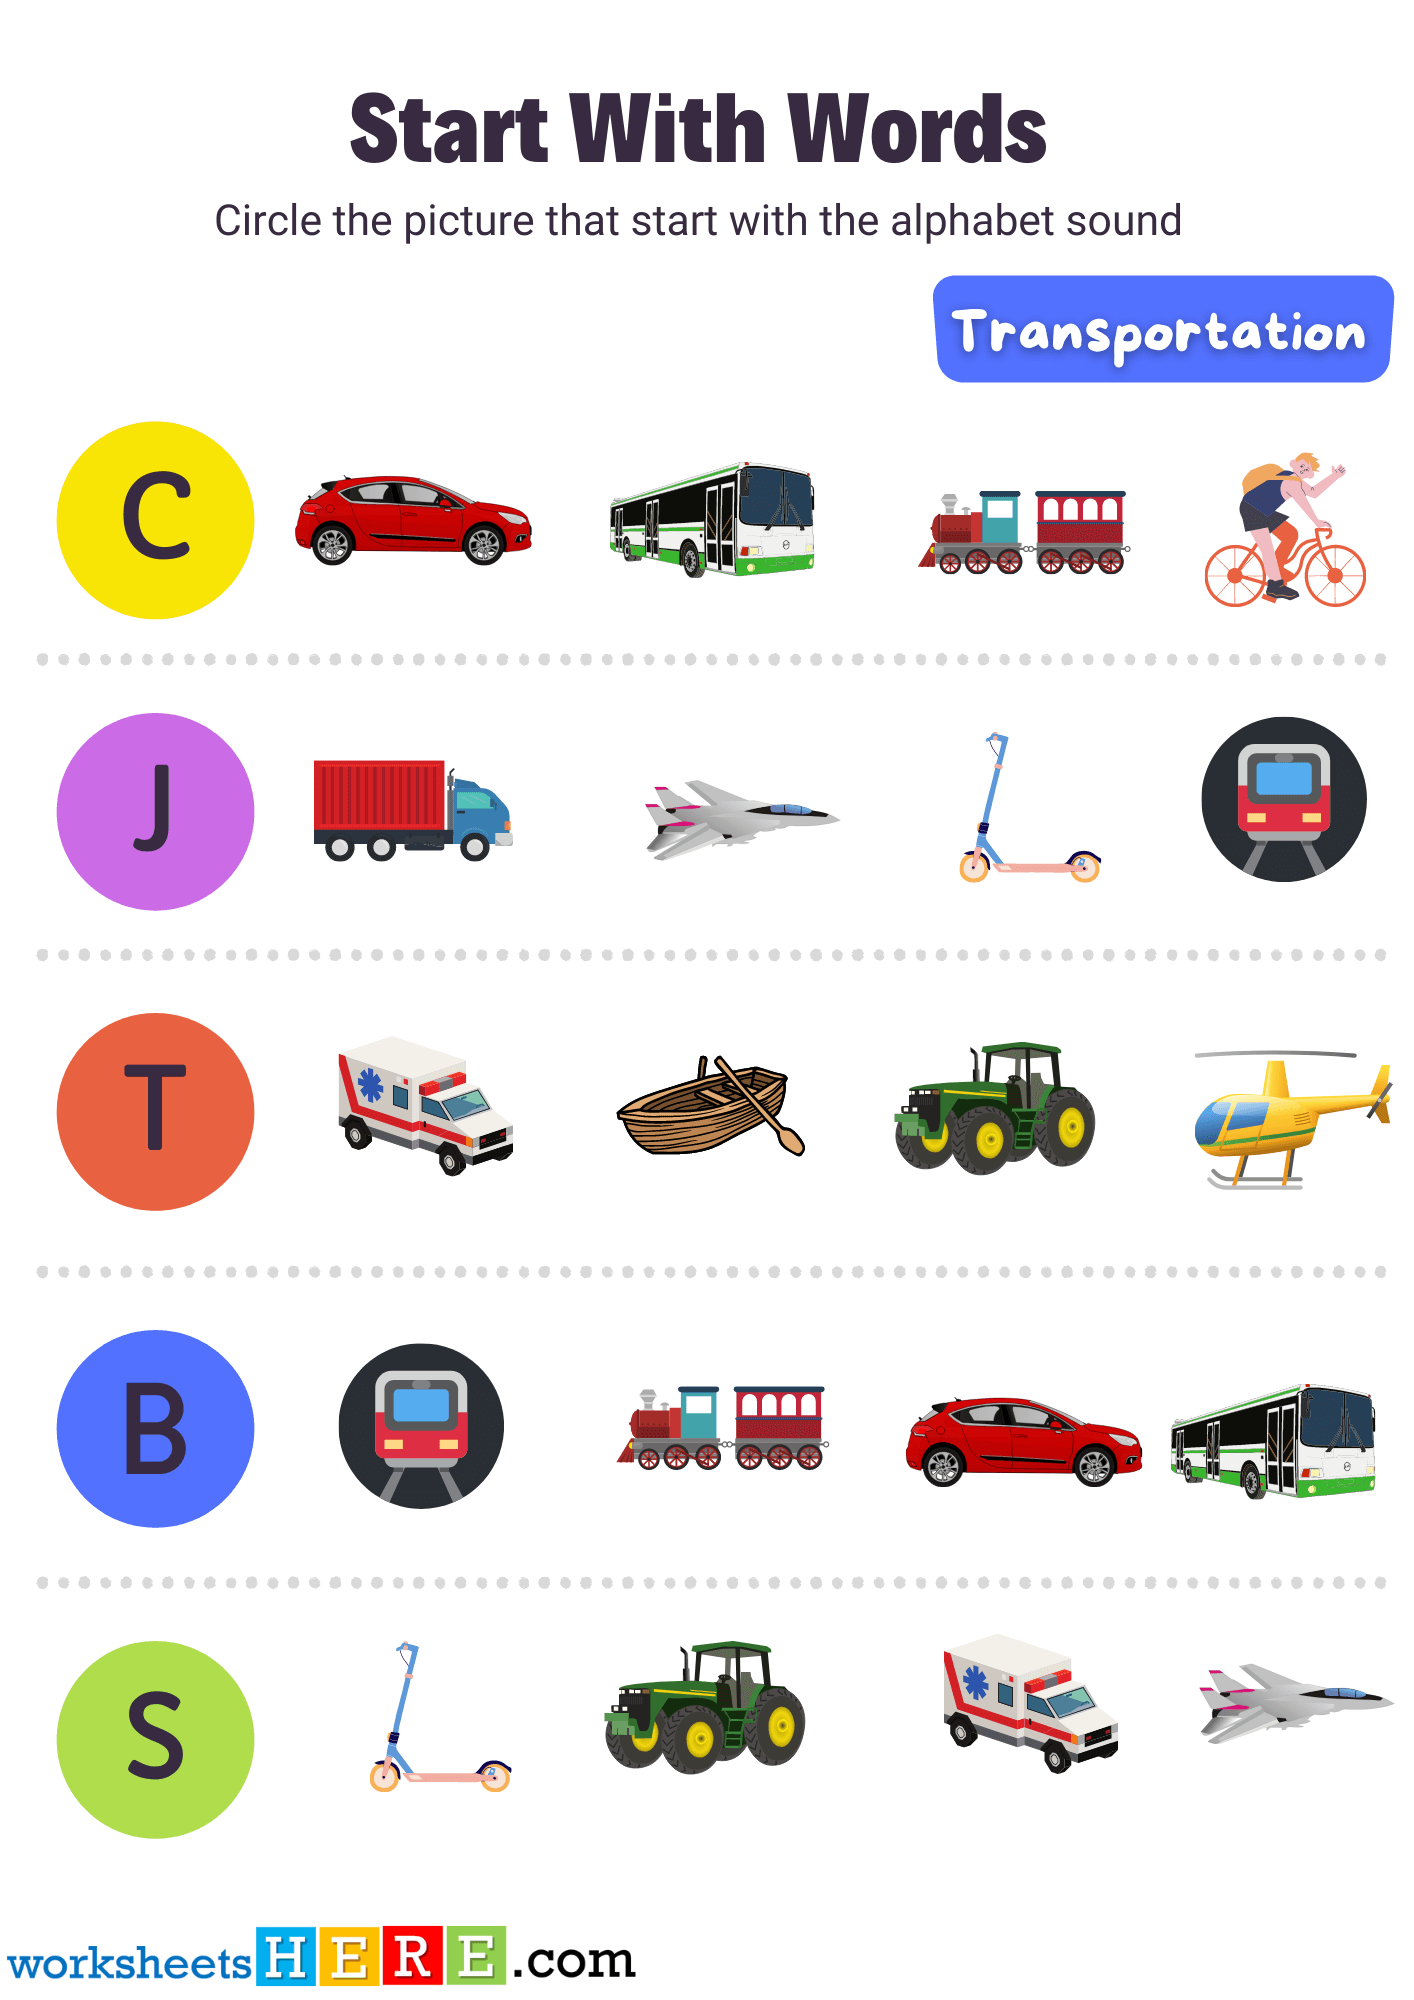 Circle Start With Words Activity About Transportation Names, Pdf Worksheets For Kids